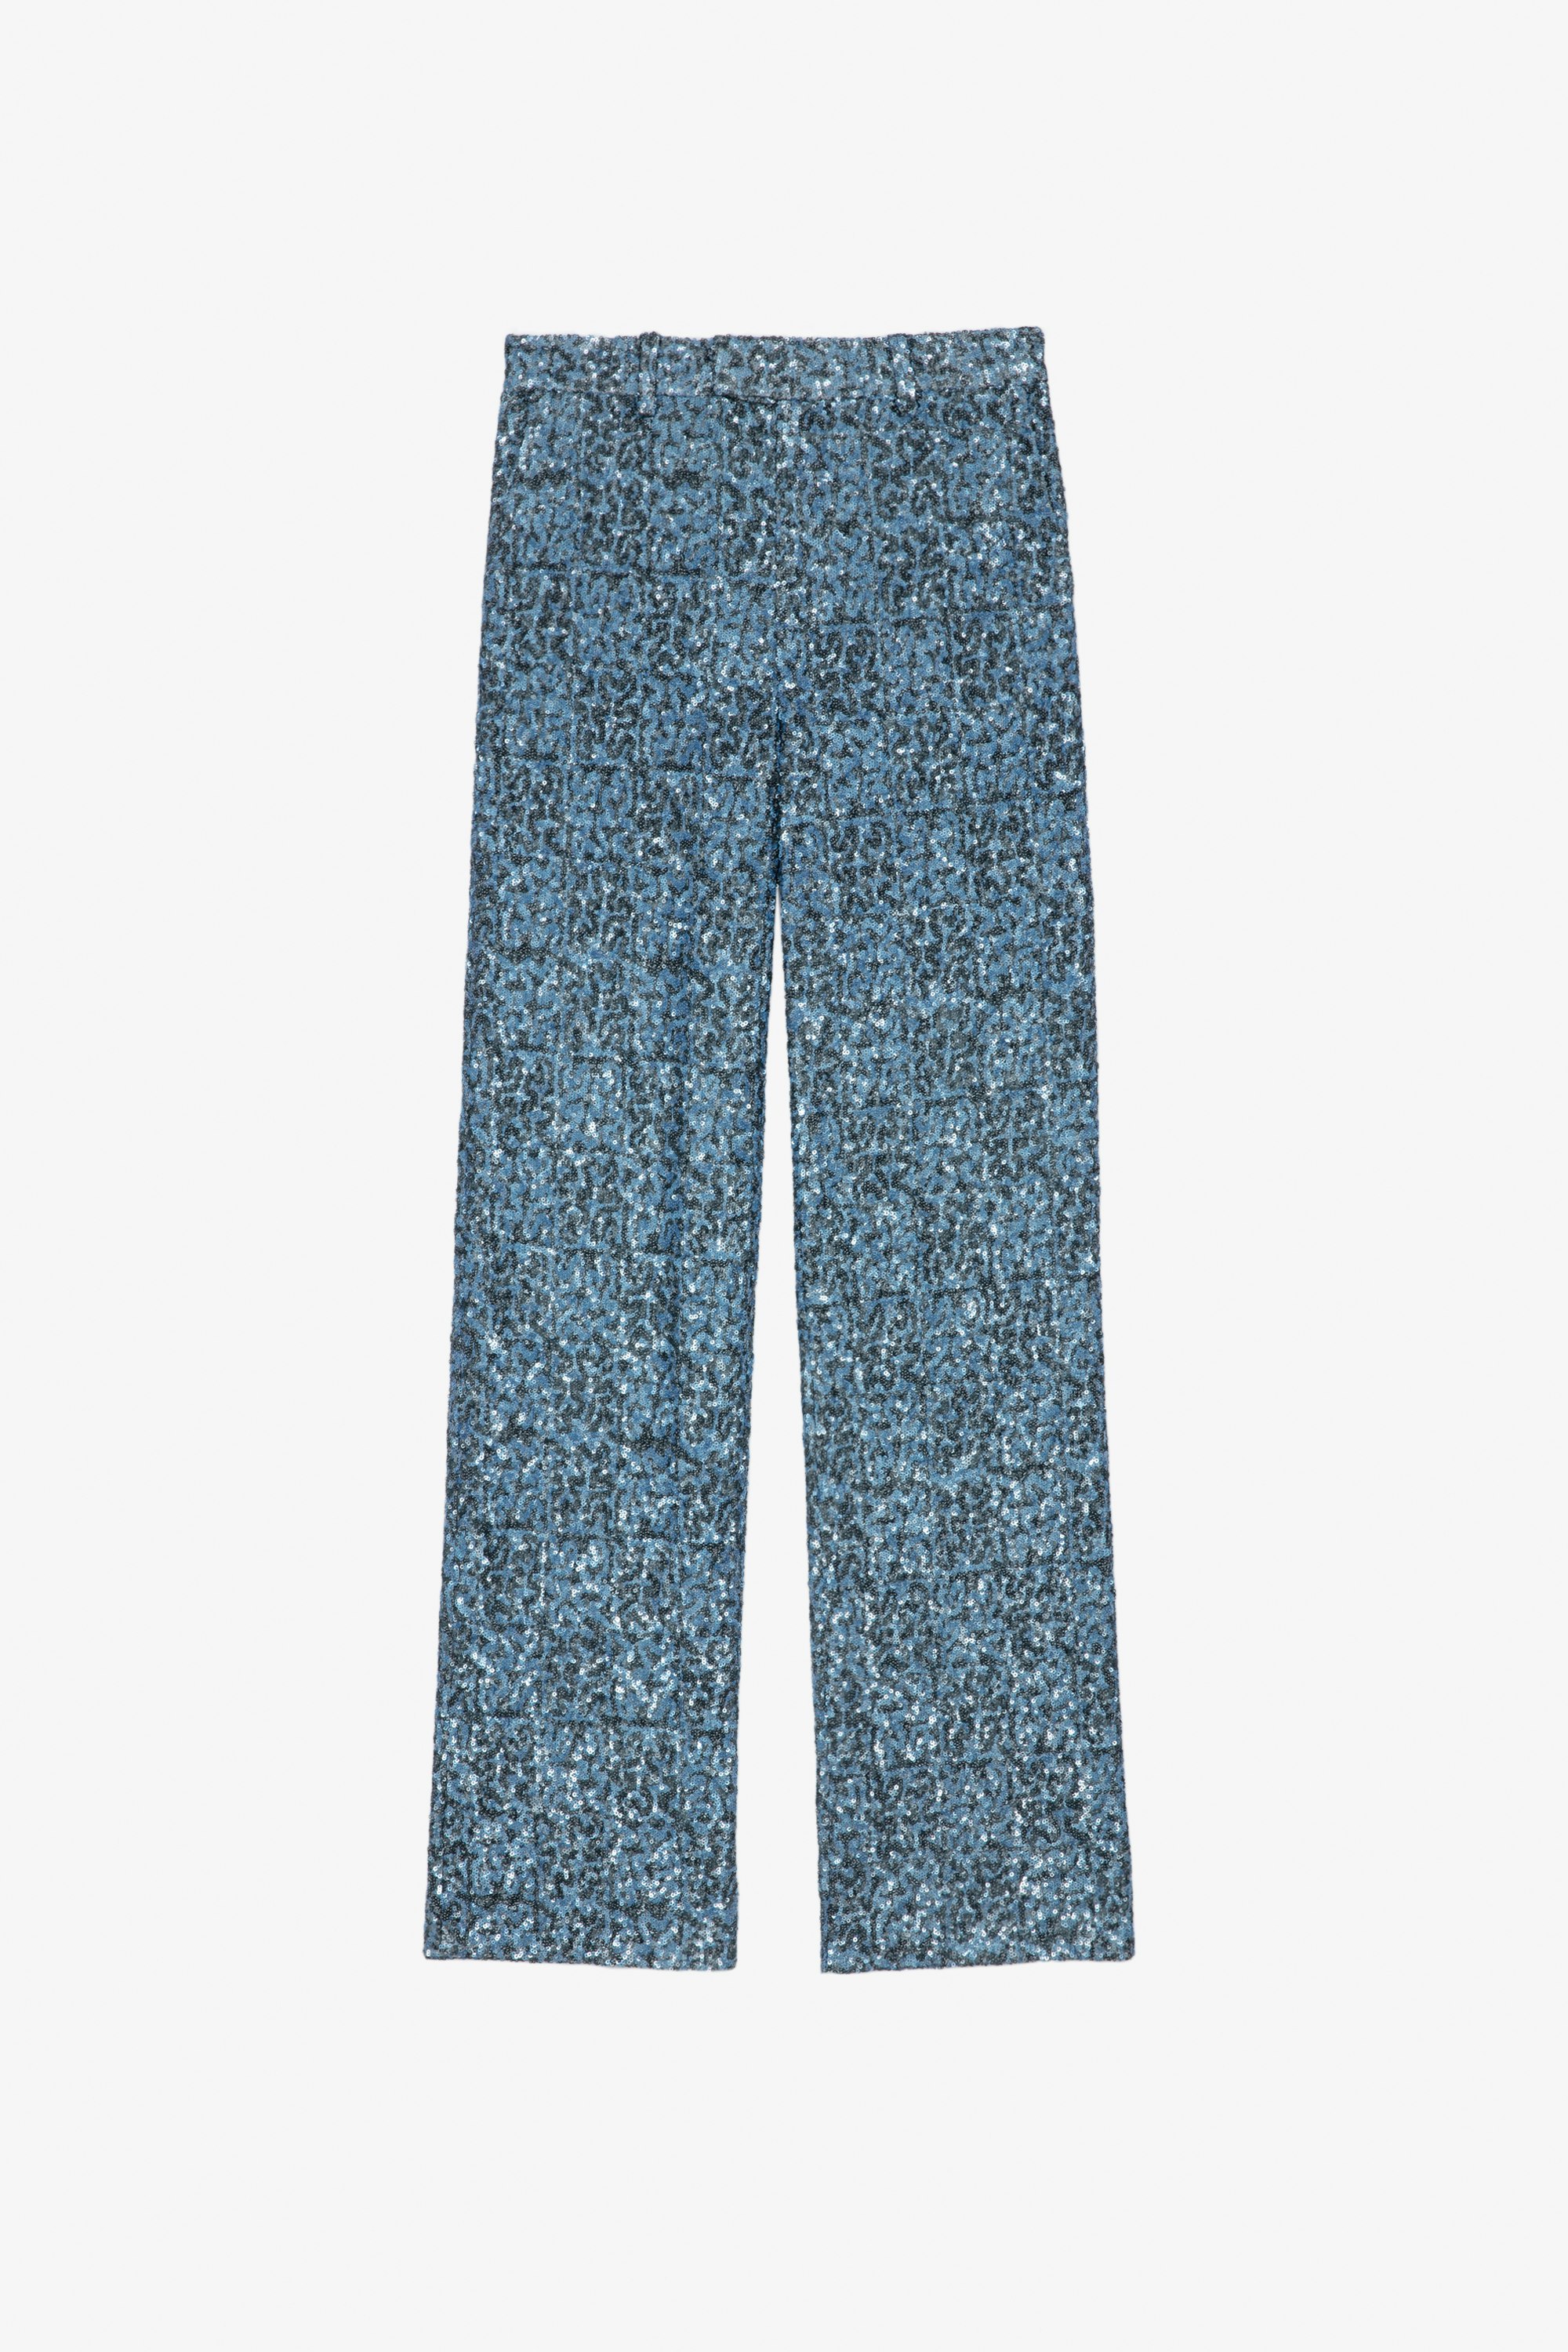 Peter Trousers Women's wide blue sequinned trousers